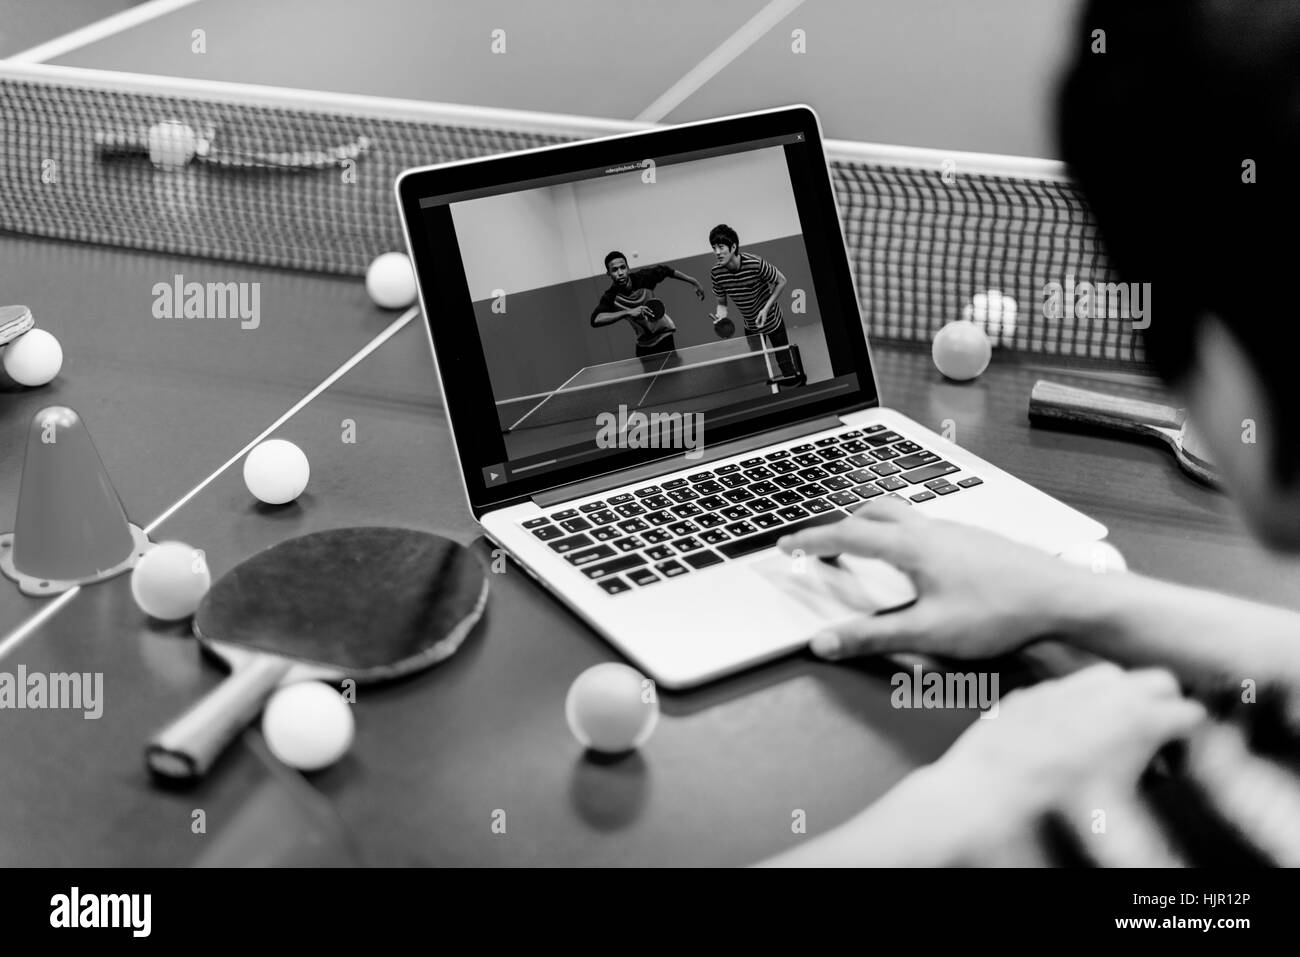 Ping Pong Table Tennis Game Practicing Sport Concept Stock Photo